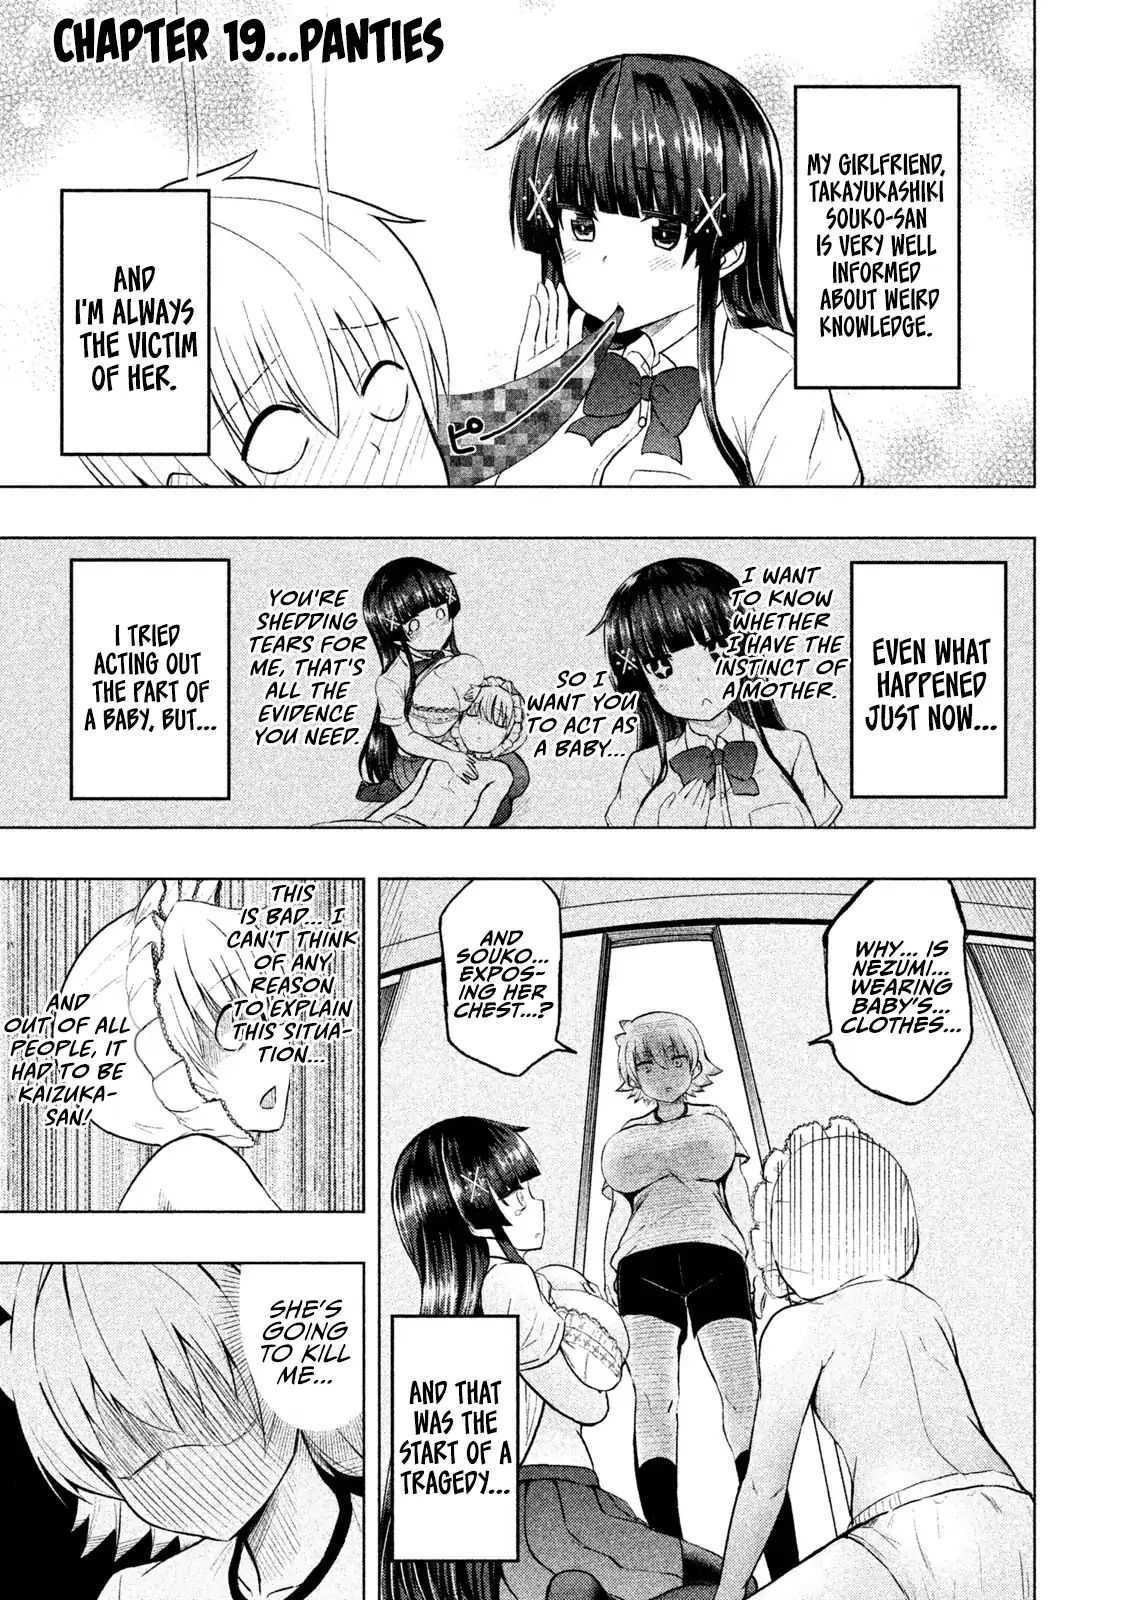 A Girl Who Is Very Well-Informed About Weird Knowledge, Takayukashiki Souko-San Chapter 19 #6